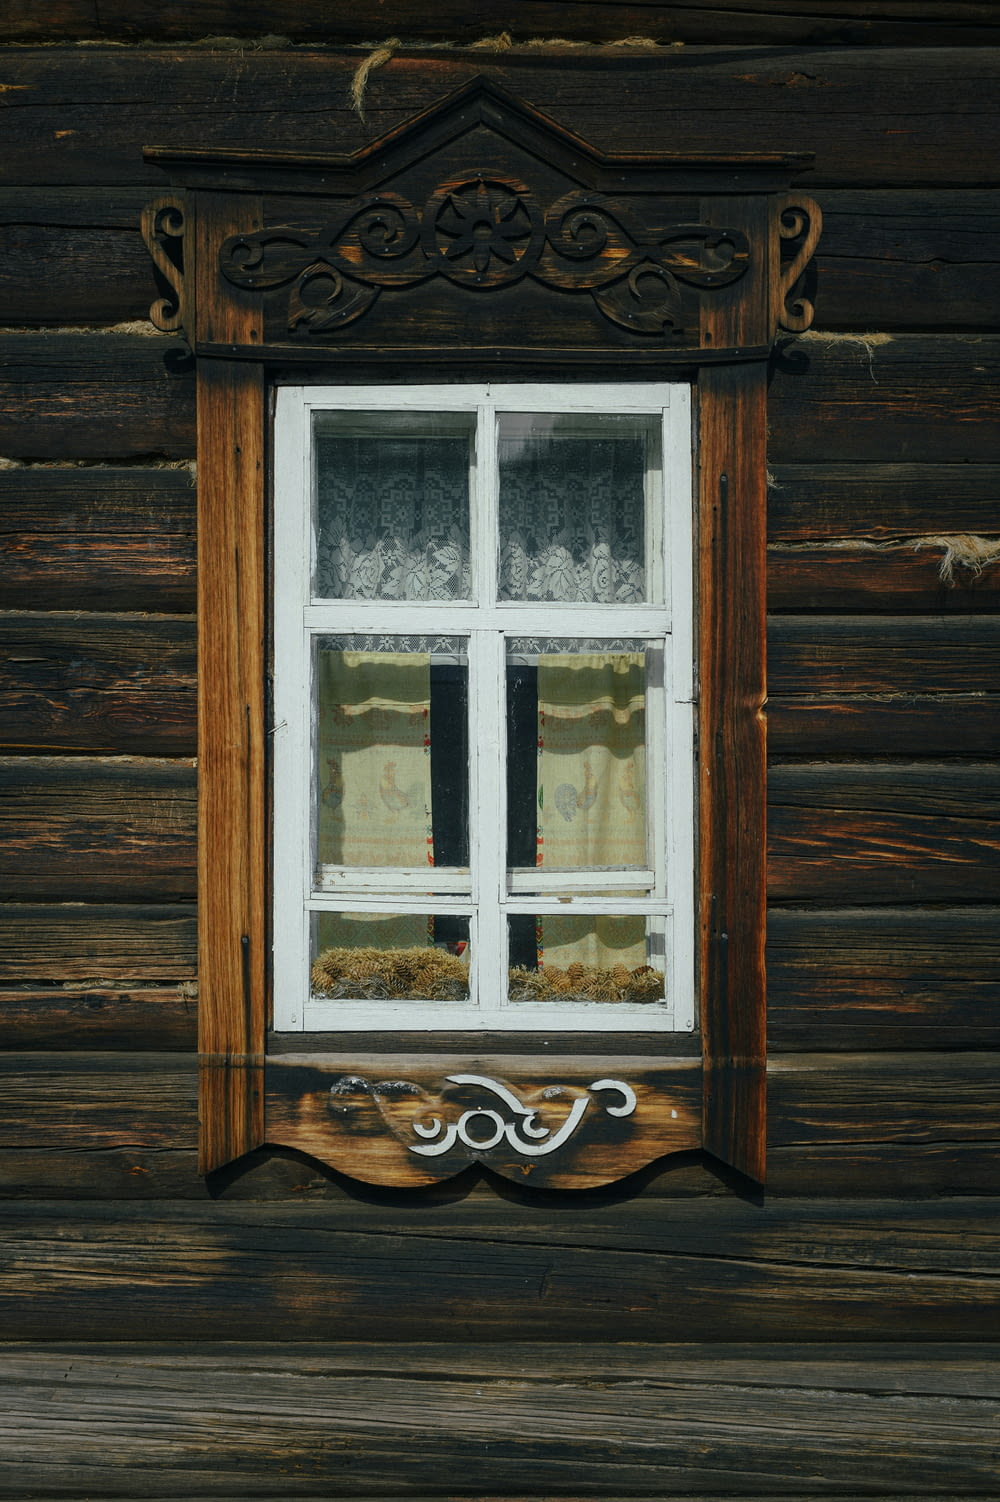 a window on a wooden wall with a window sill